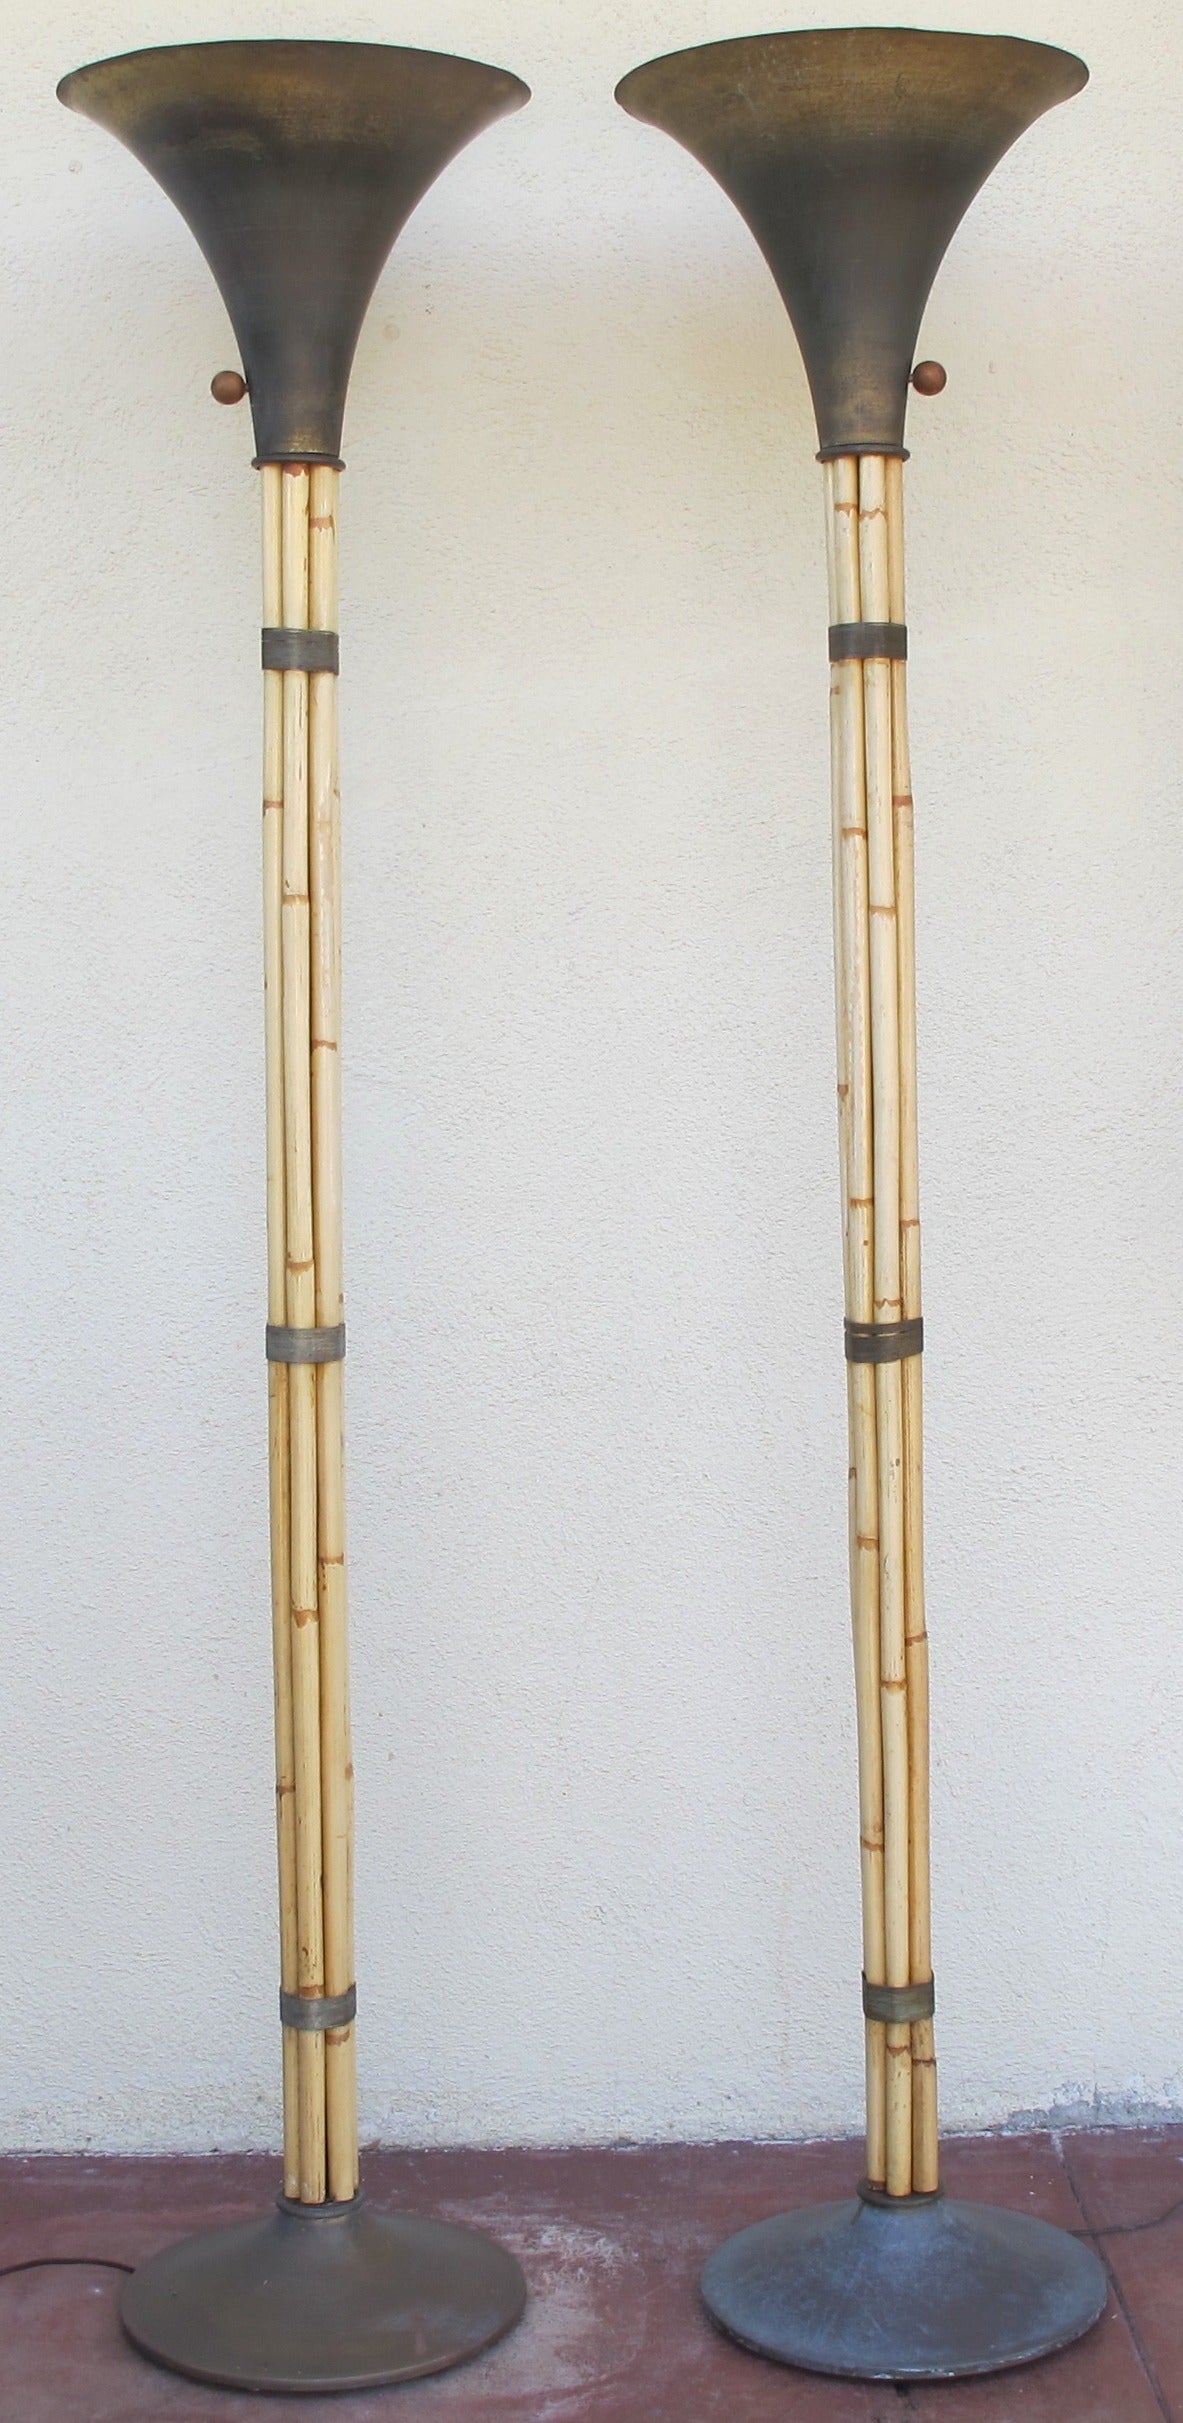 Great looking pair of Art Deco Lamps by Russel Wright. With bamboo and brass.